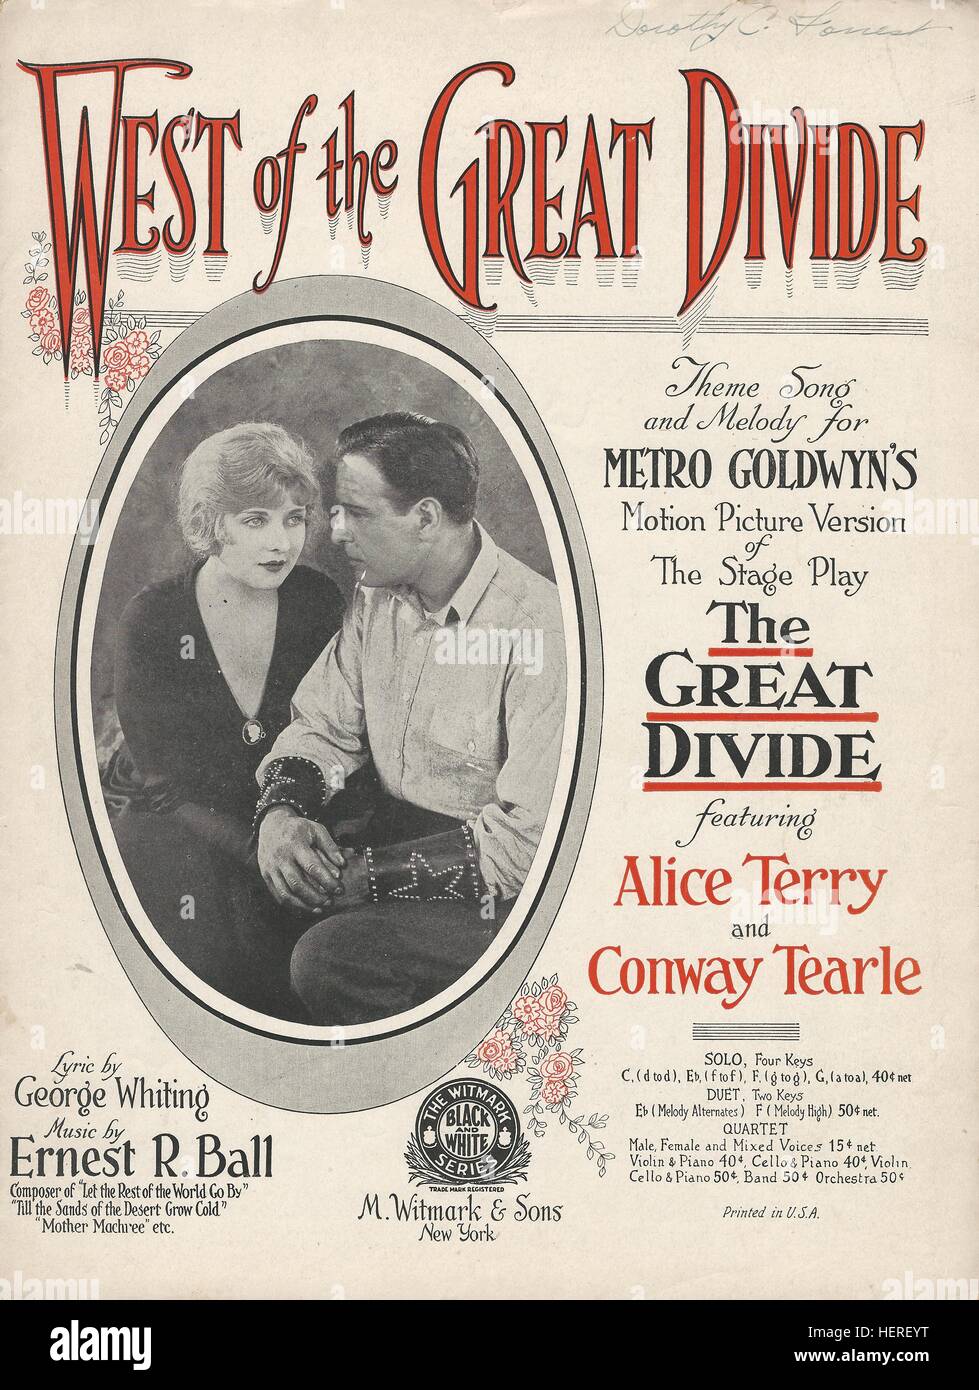 'West of the Great Divide' from 1924 Movie 'The Great Divide' Sheet Music Cover Stock Photo